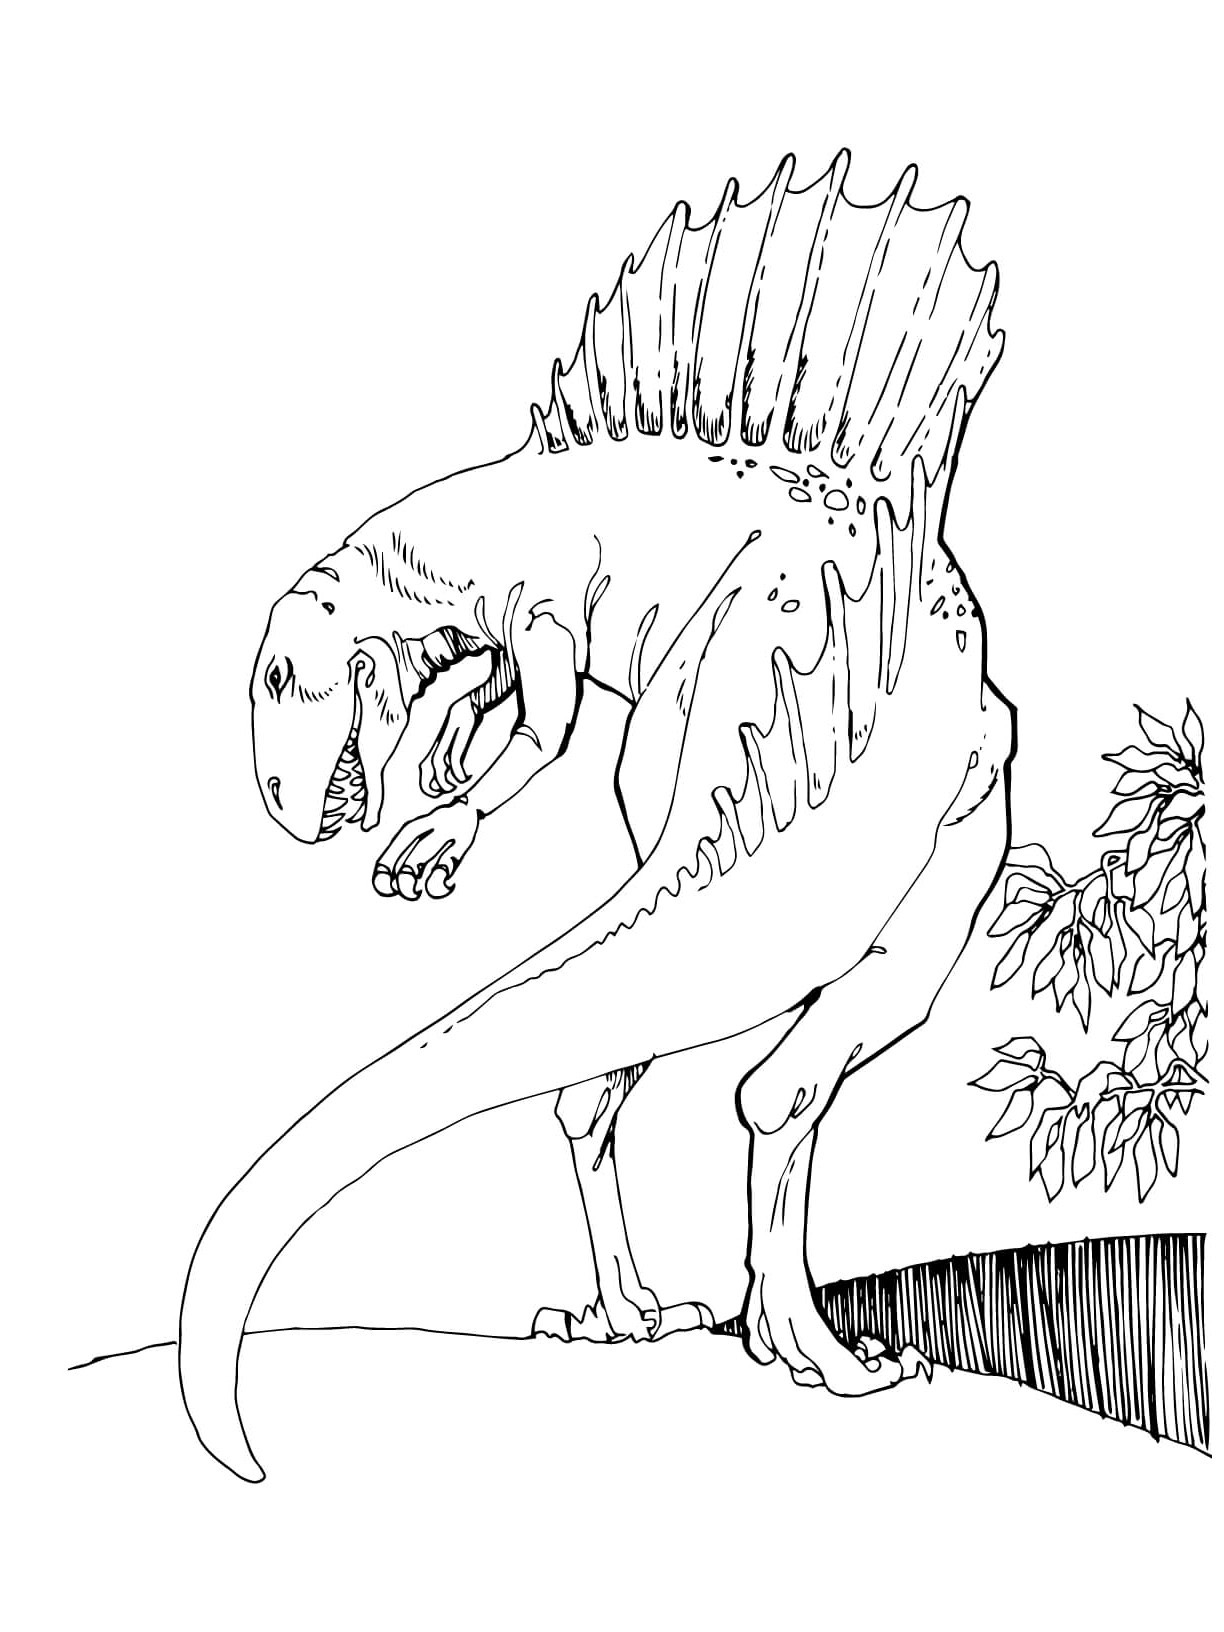 Jurassic World Coloring Pages.